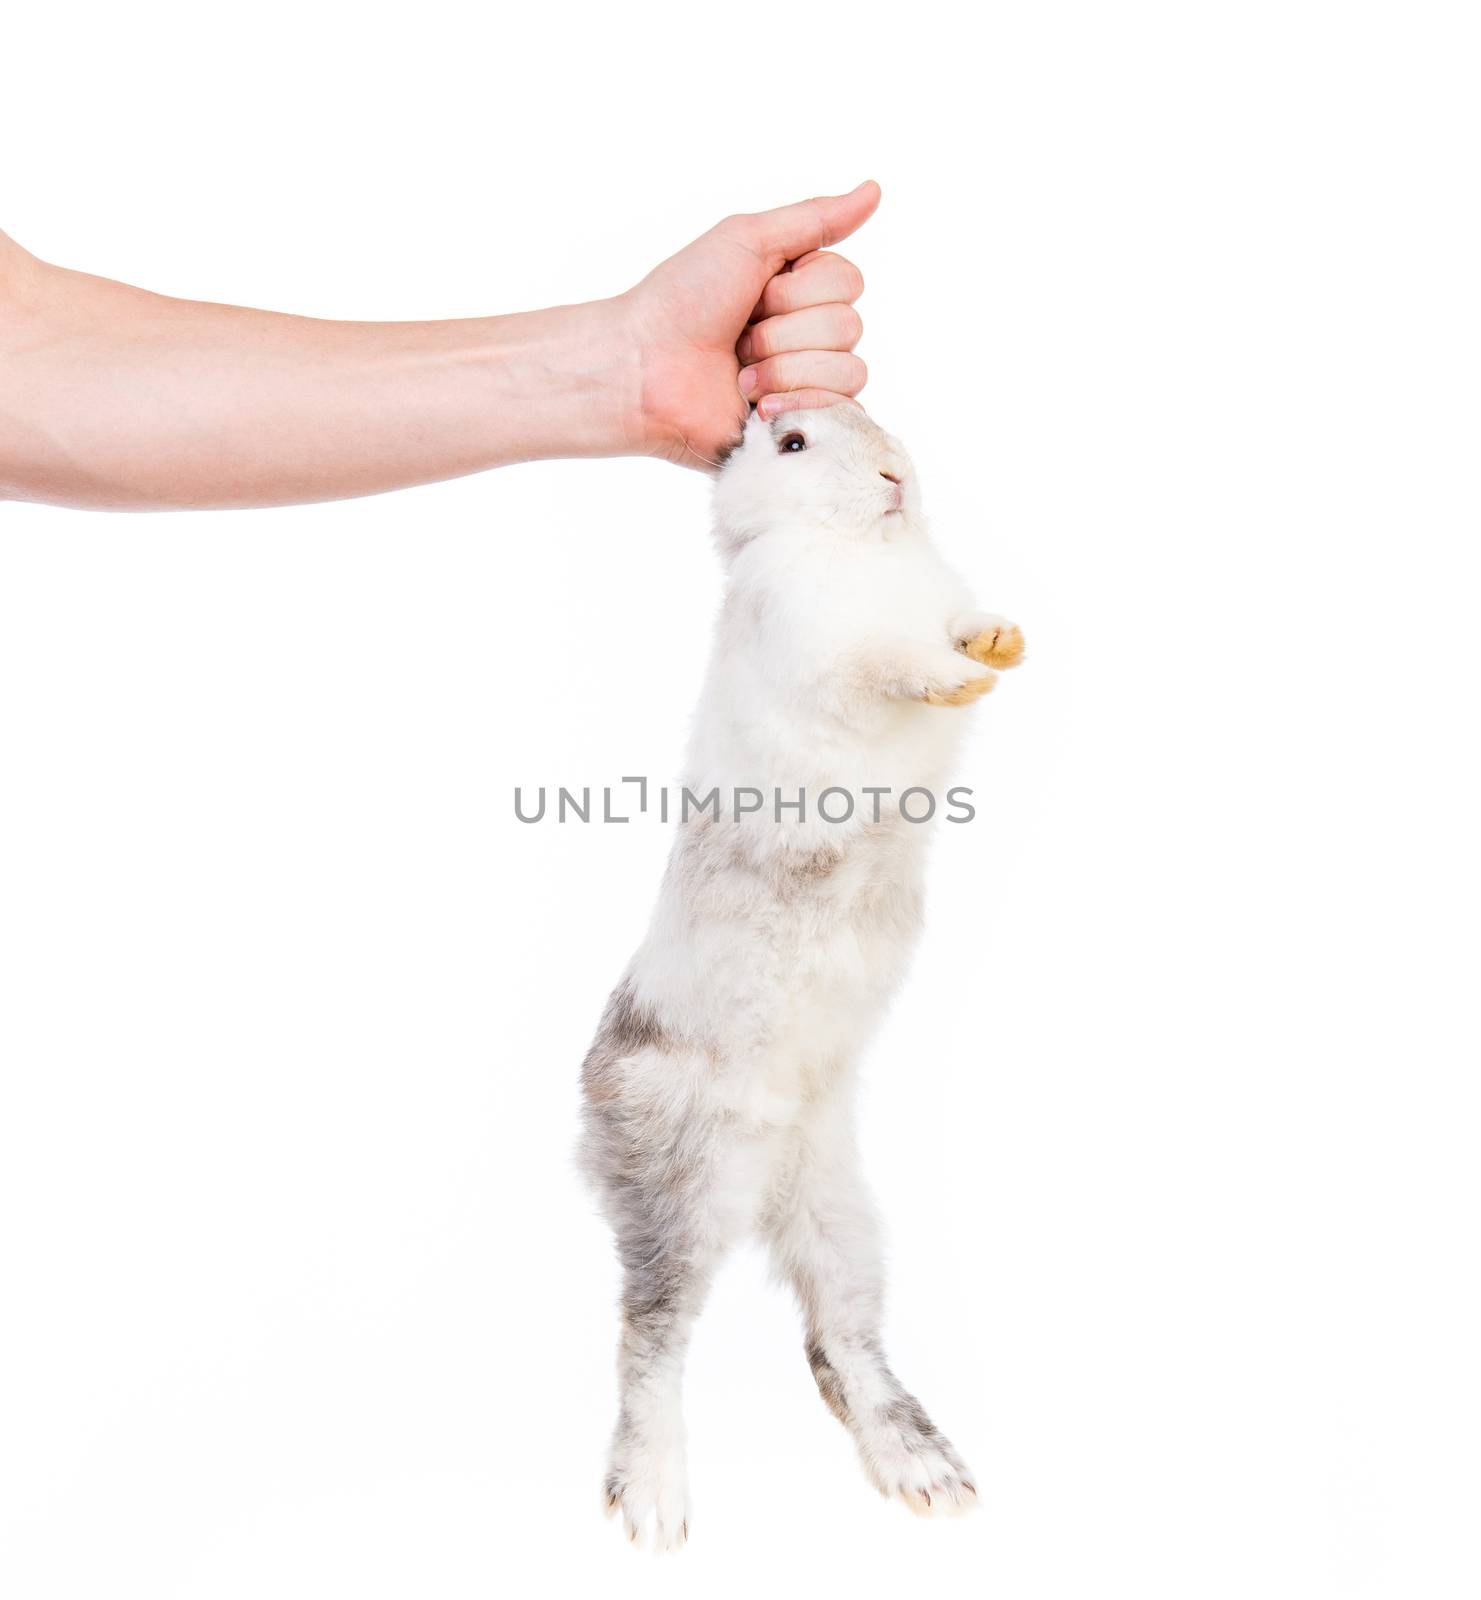 hand holding a white rabbit by the ears isolated on white background